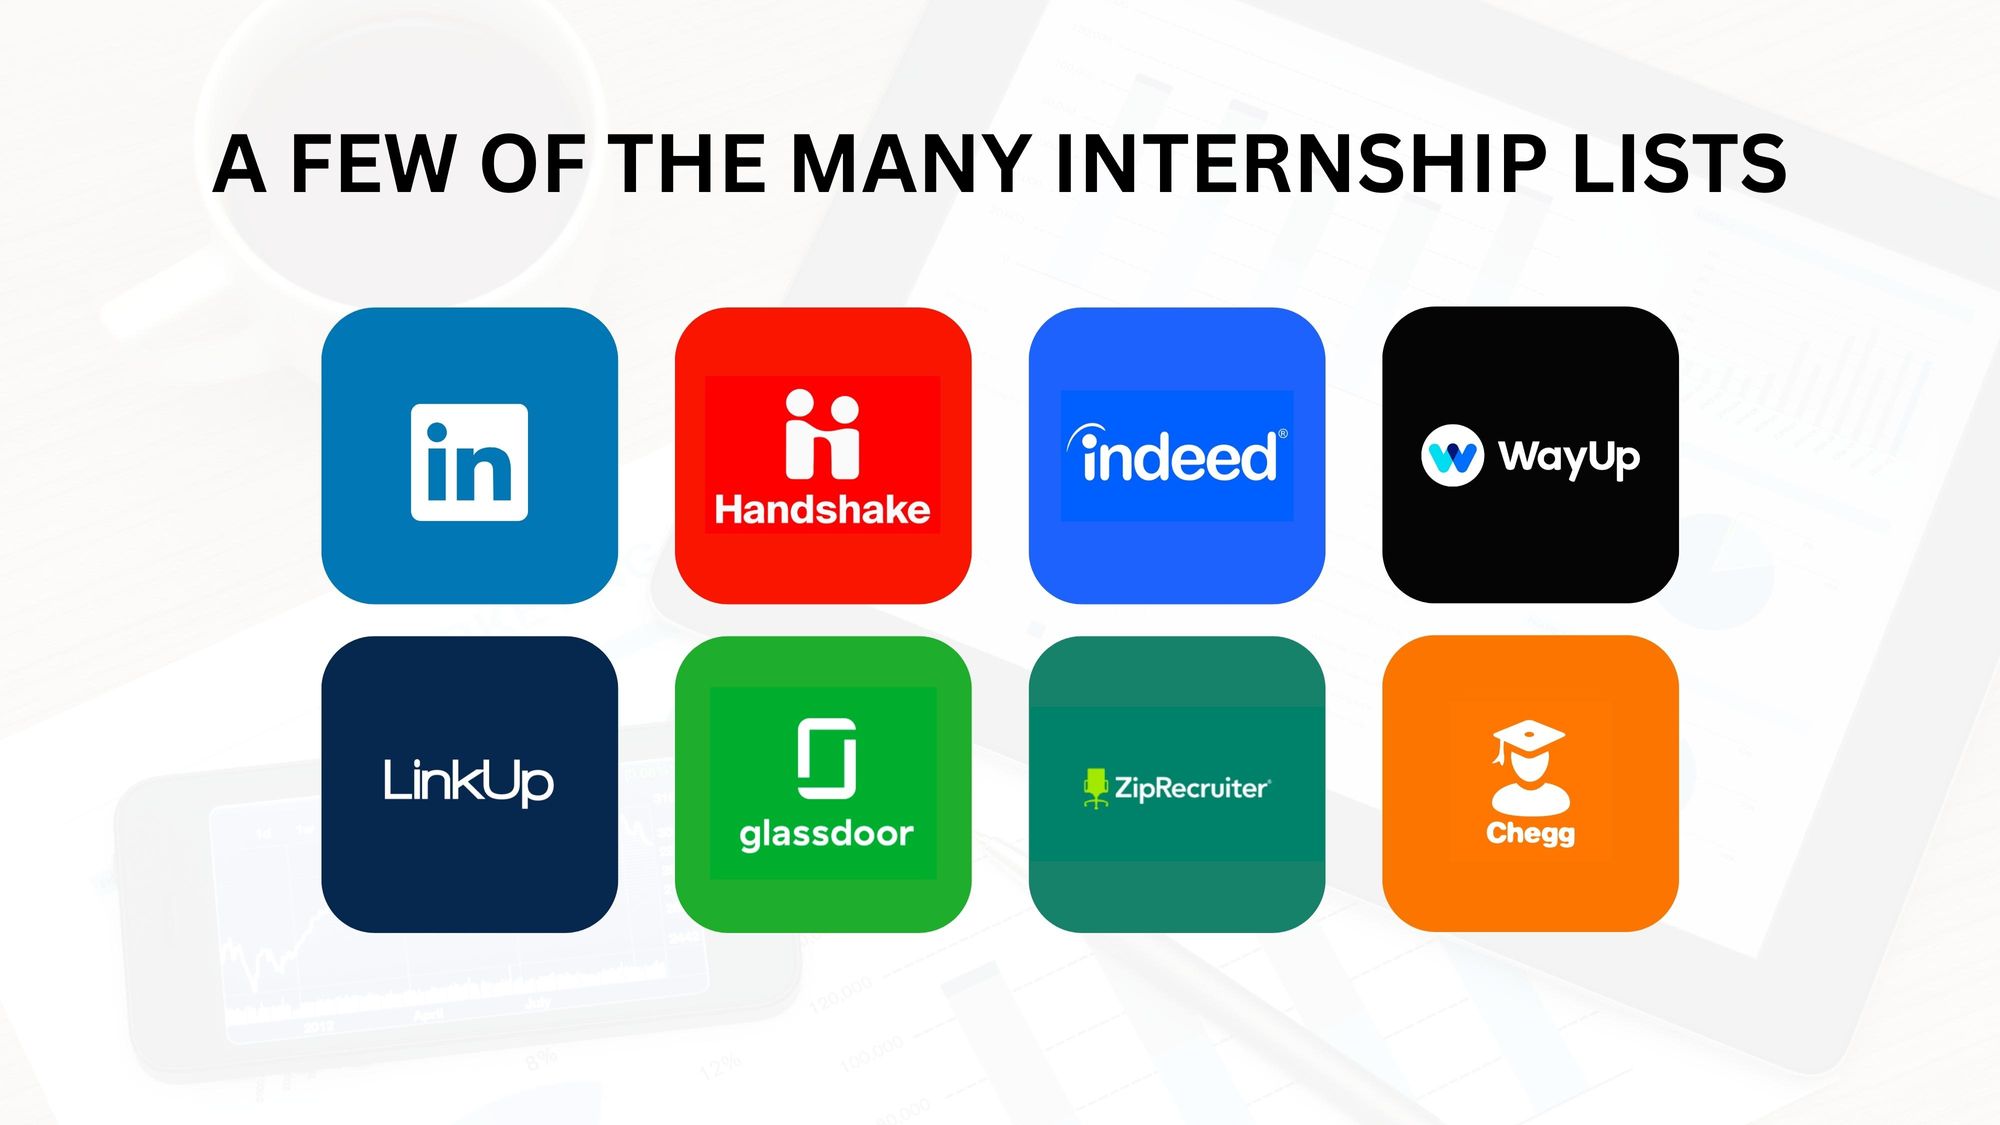 Infographic showing the logos of eight well-known internship listing boards.